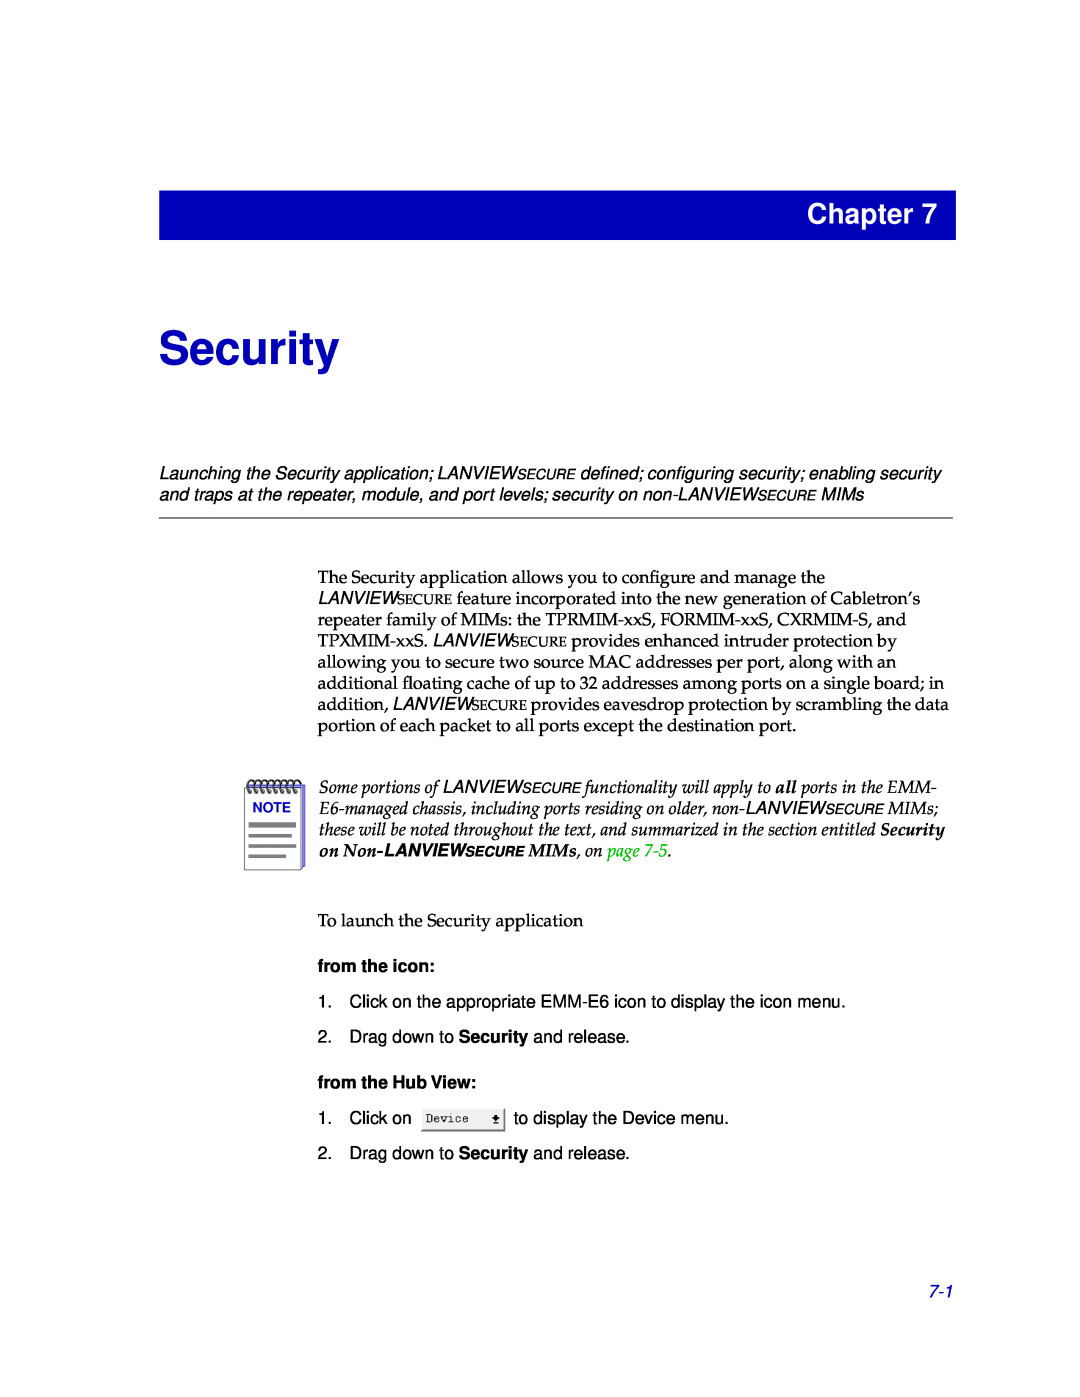 Cabletron Systems EMM-E6 manual Security, Chapter, from the icon, from the Hub View 